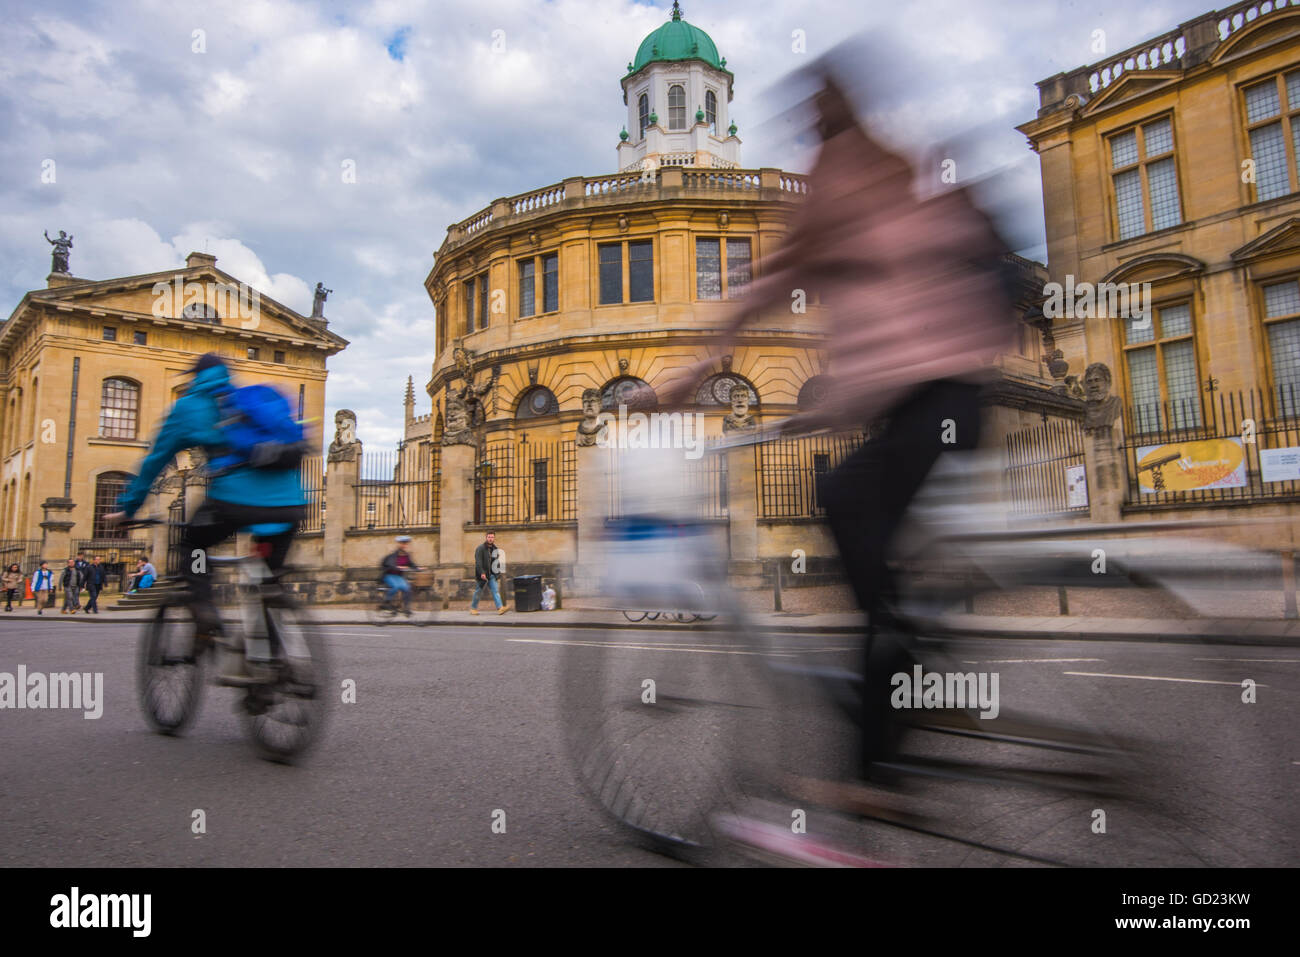 Cyclists passing the Sheldonian Theatre, Oxford, Oxfordshire, England, United Kingdom, Europe Stock Photo